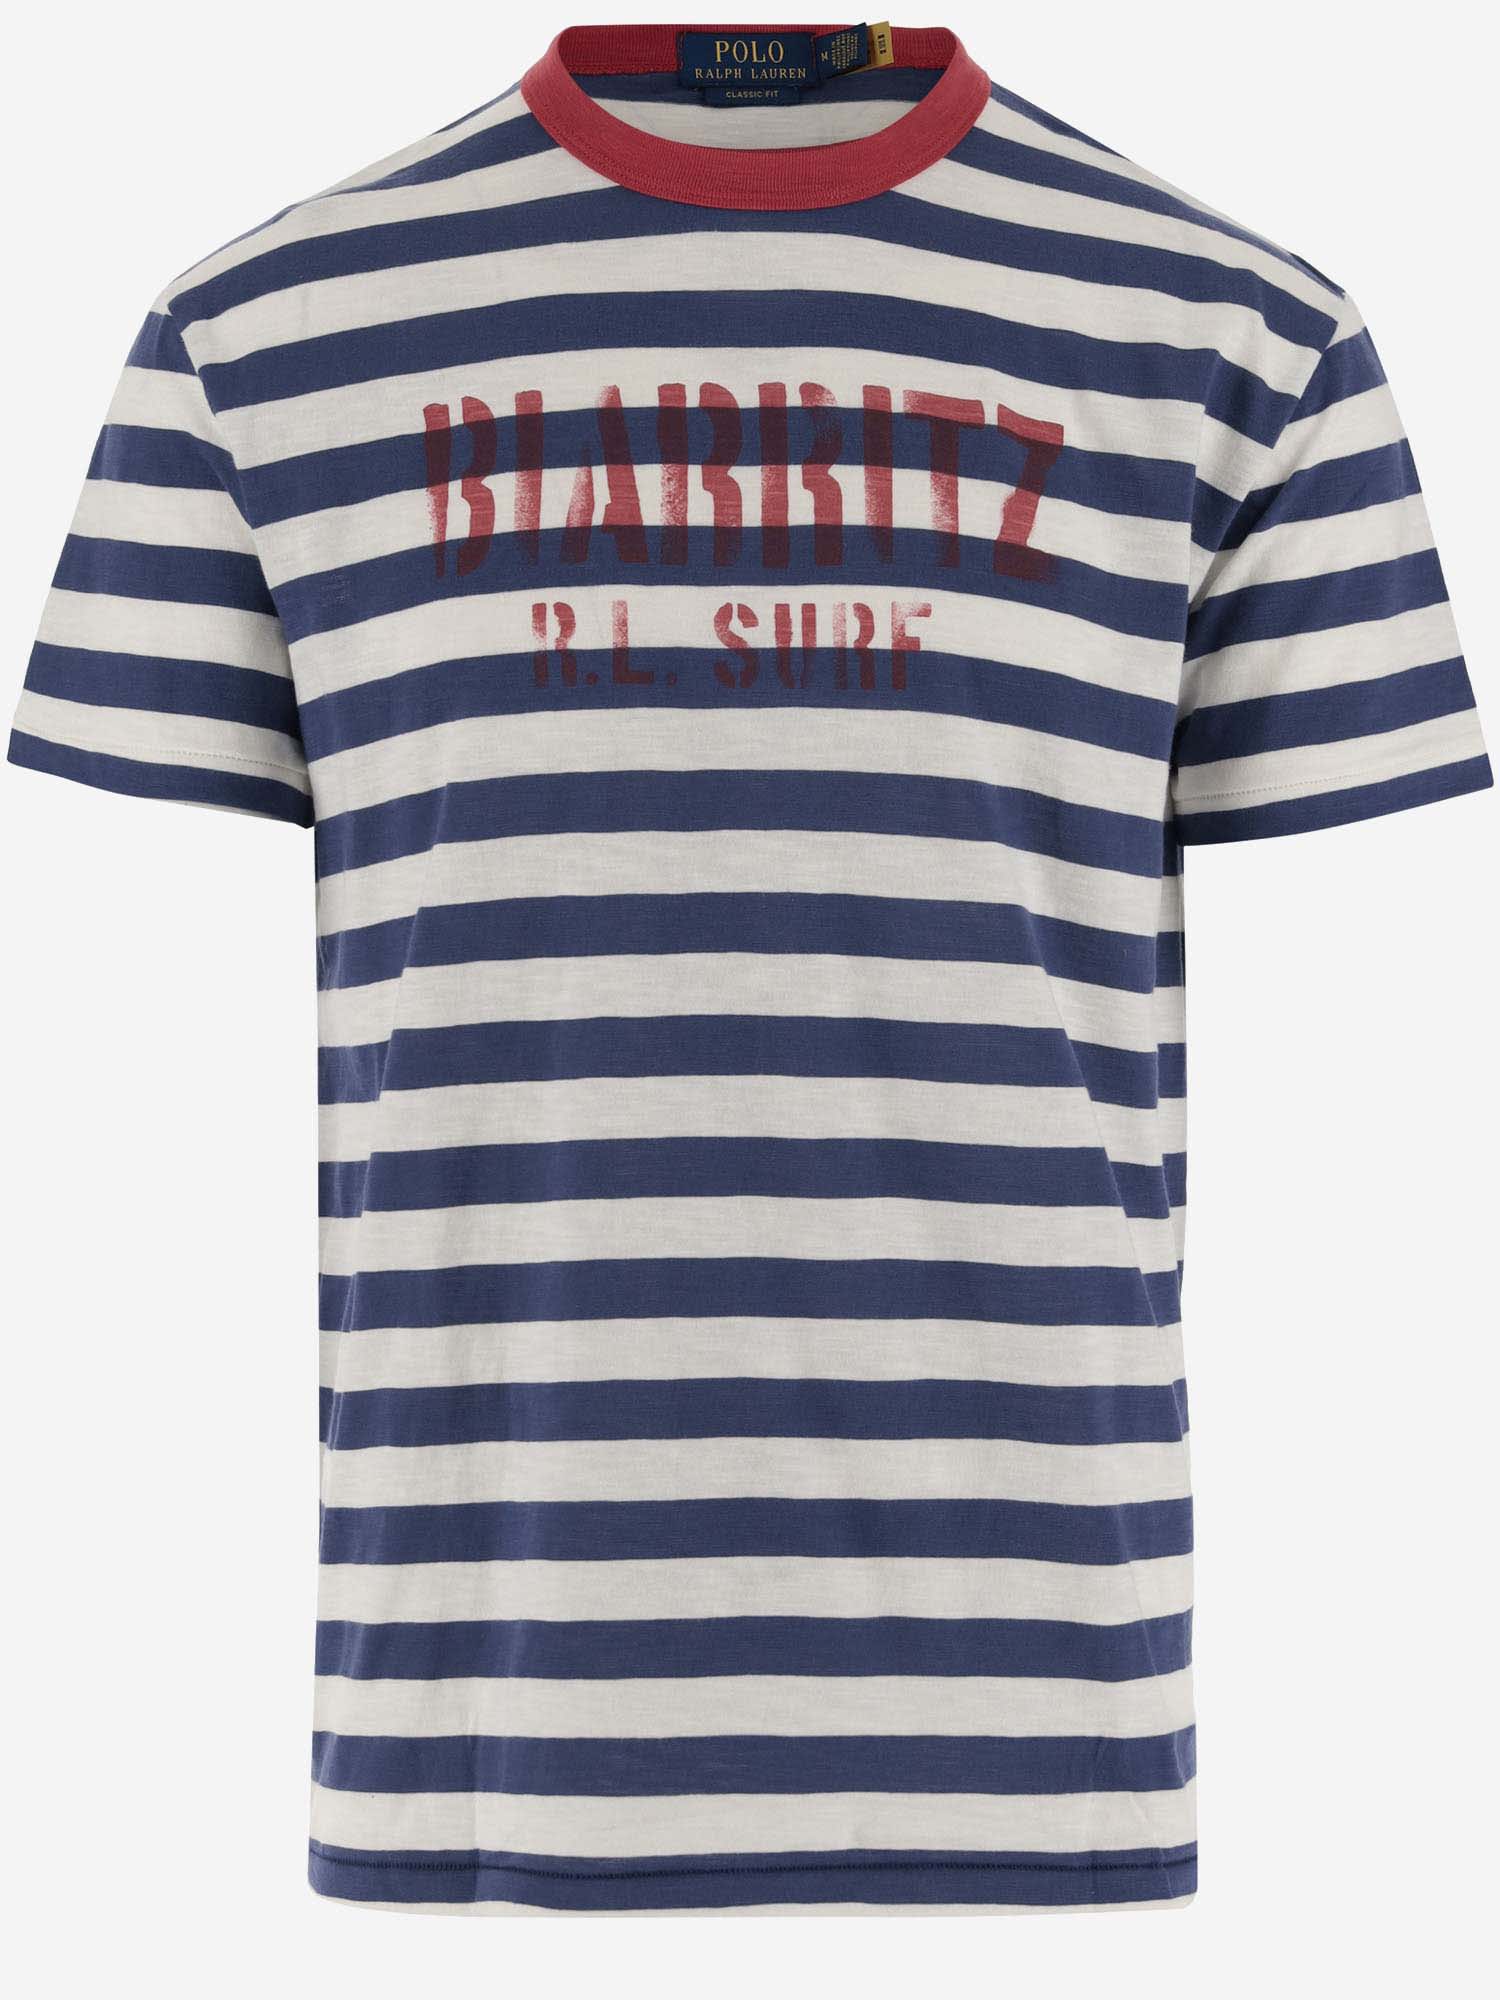 RALPH LAUREN COTTON T-SHIRT WITH STRIPED PATTERN AND LOGO